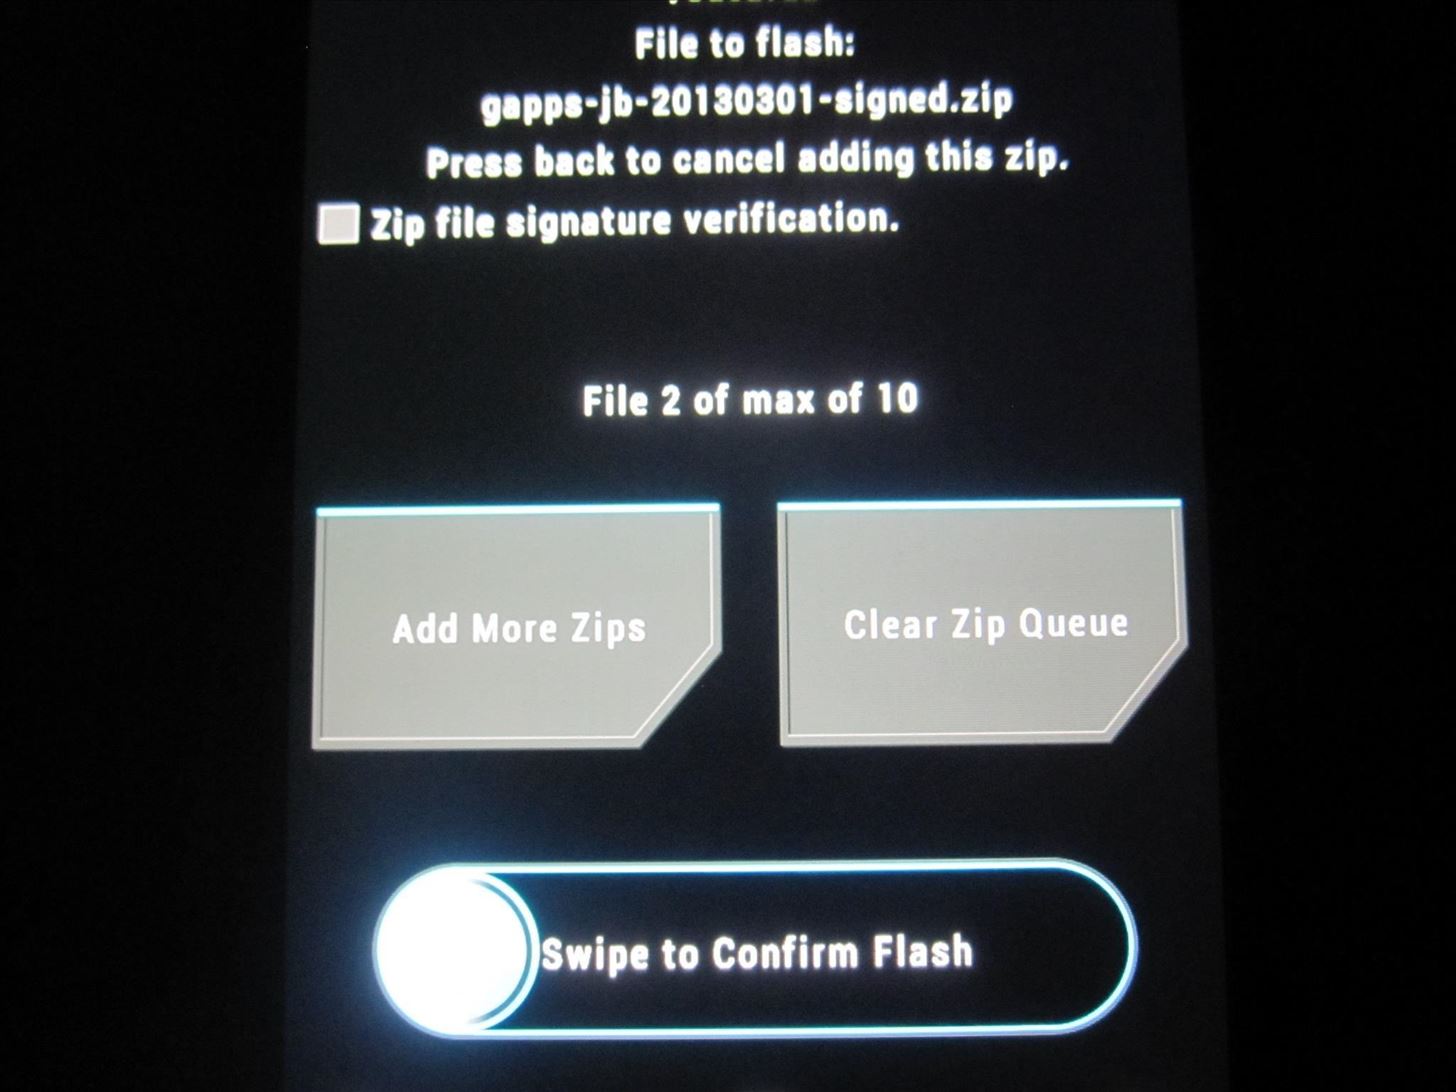 How to Remove OEM Skins & Carrier Bloatware on Your HTC EVO 4G LTE with CyanogenMod